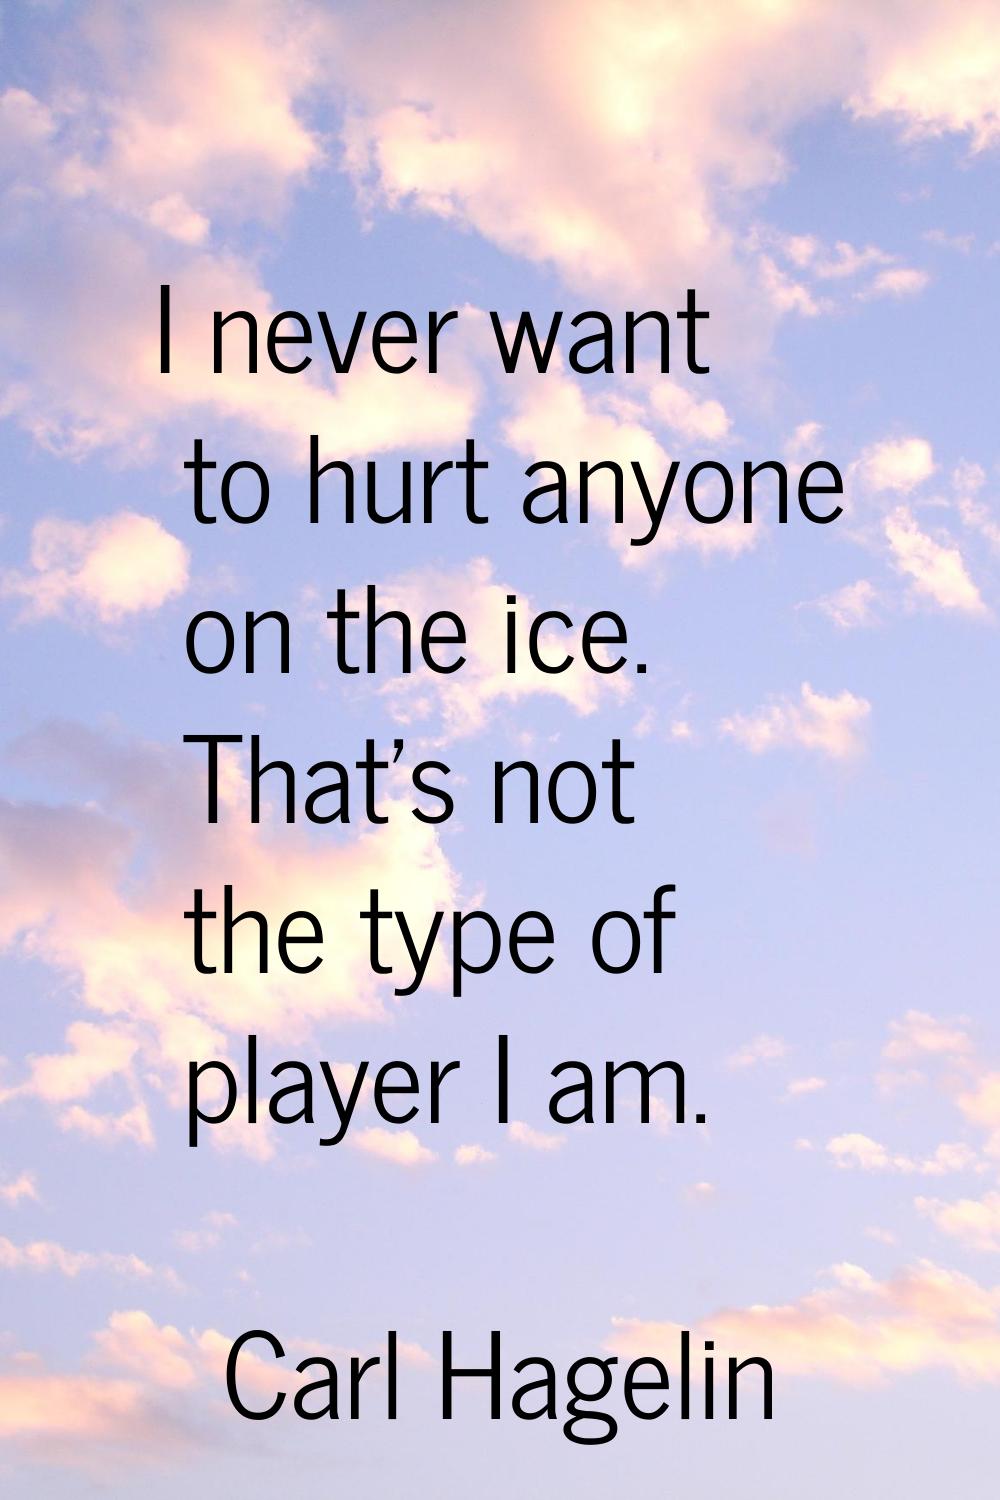 I never want to hurt anyone on the ice. That's not the type of player I am.